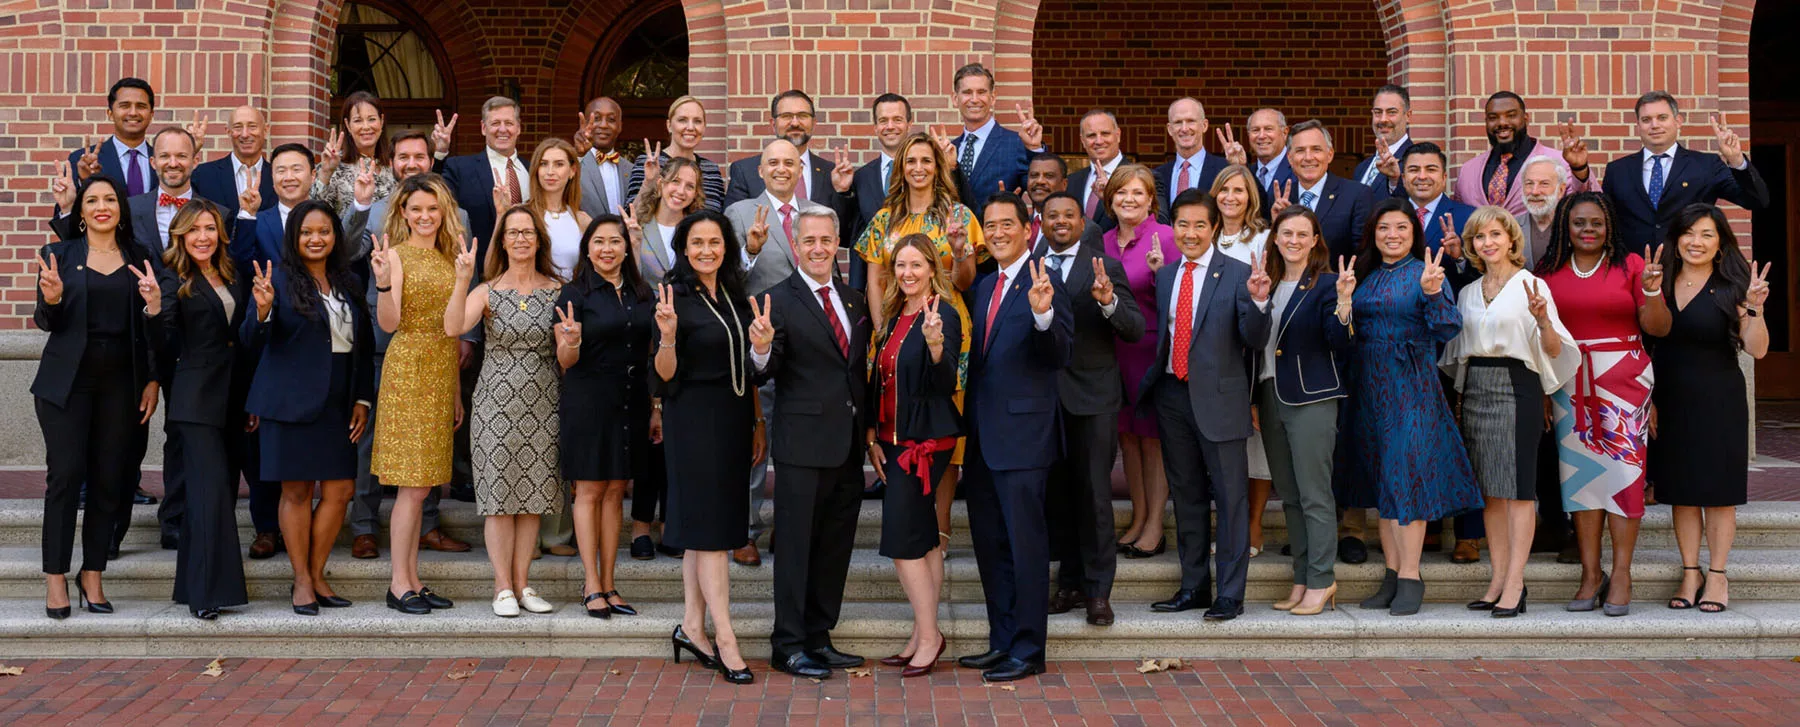 Board of Governors group photo